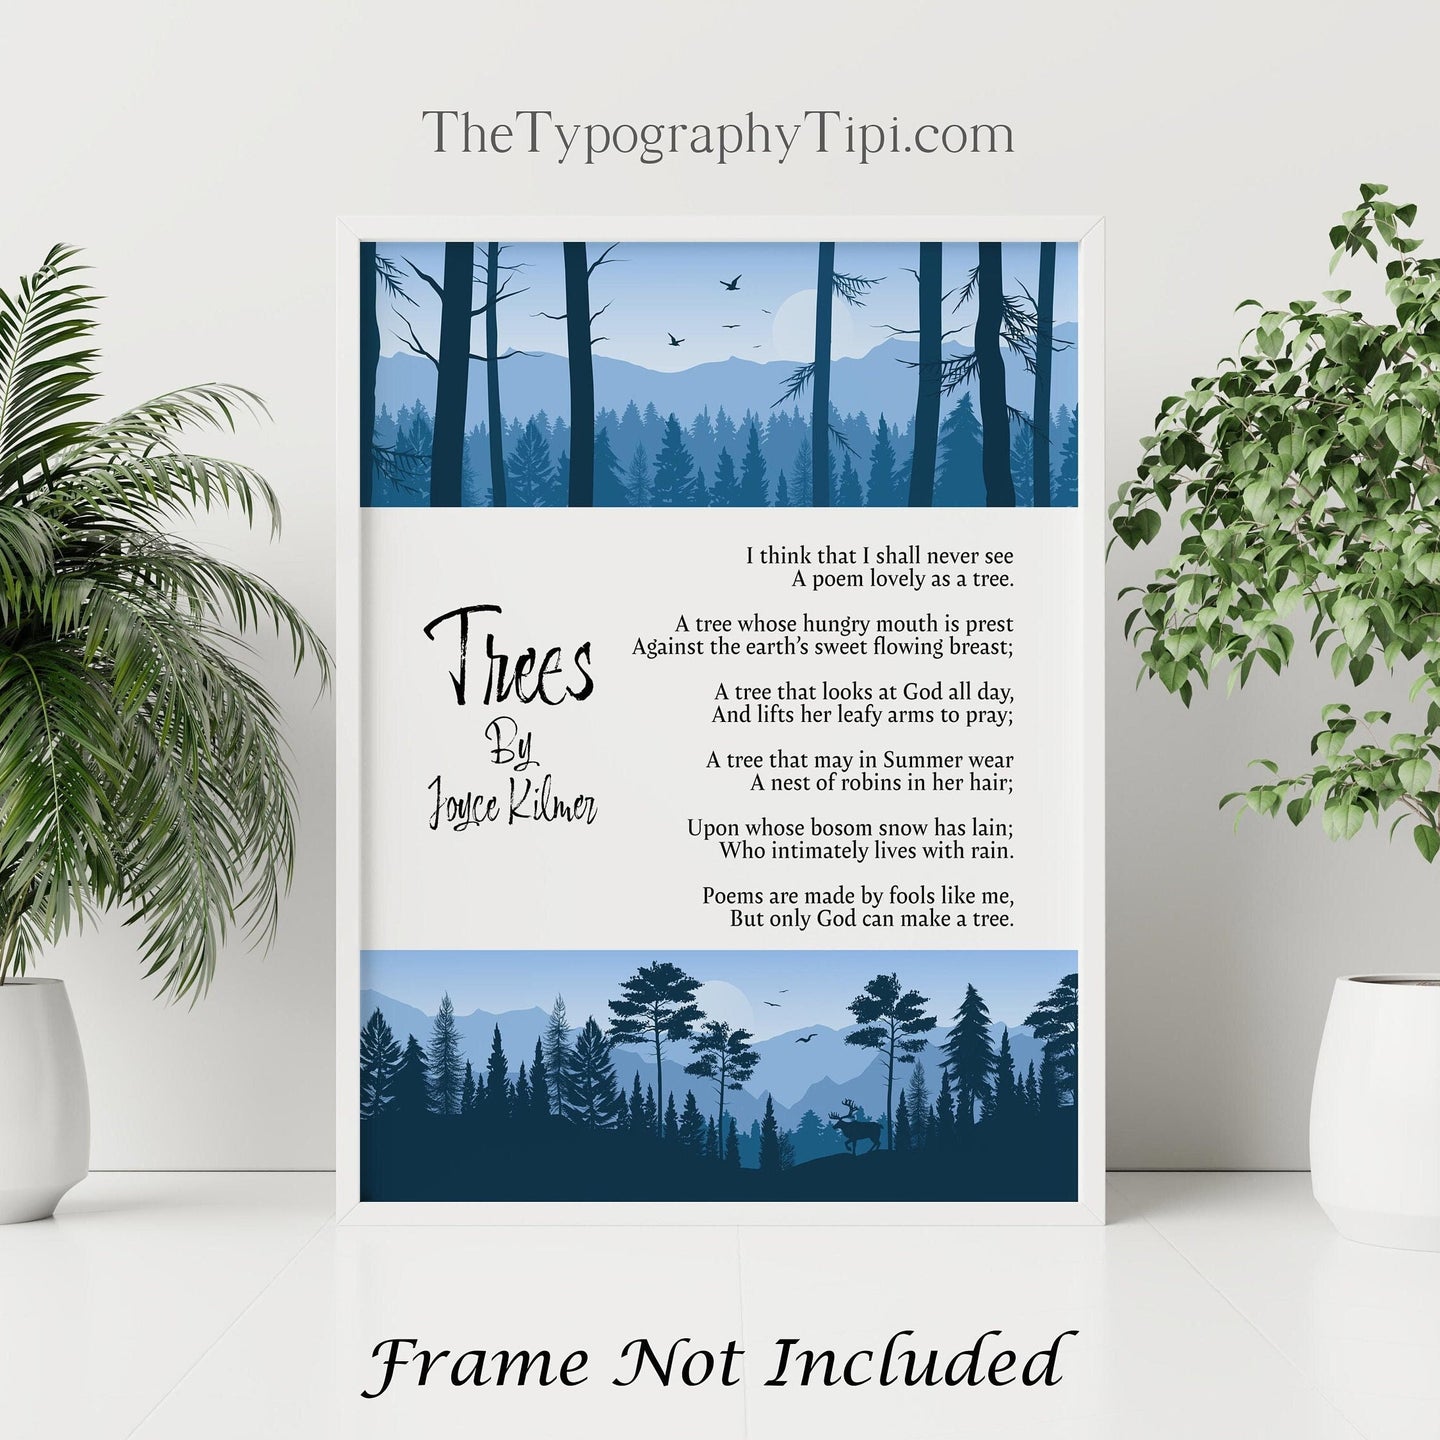 Trees By Joyce Kilmer - Poem Poster Print - Poetry Wall Art - Physical Print Without Frame